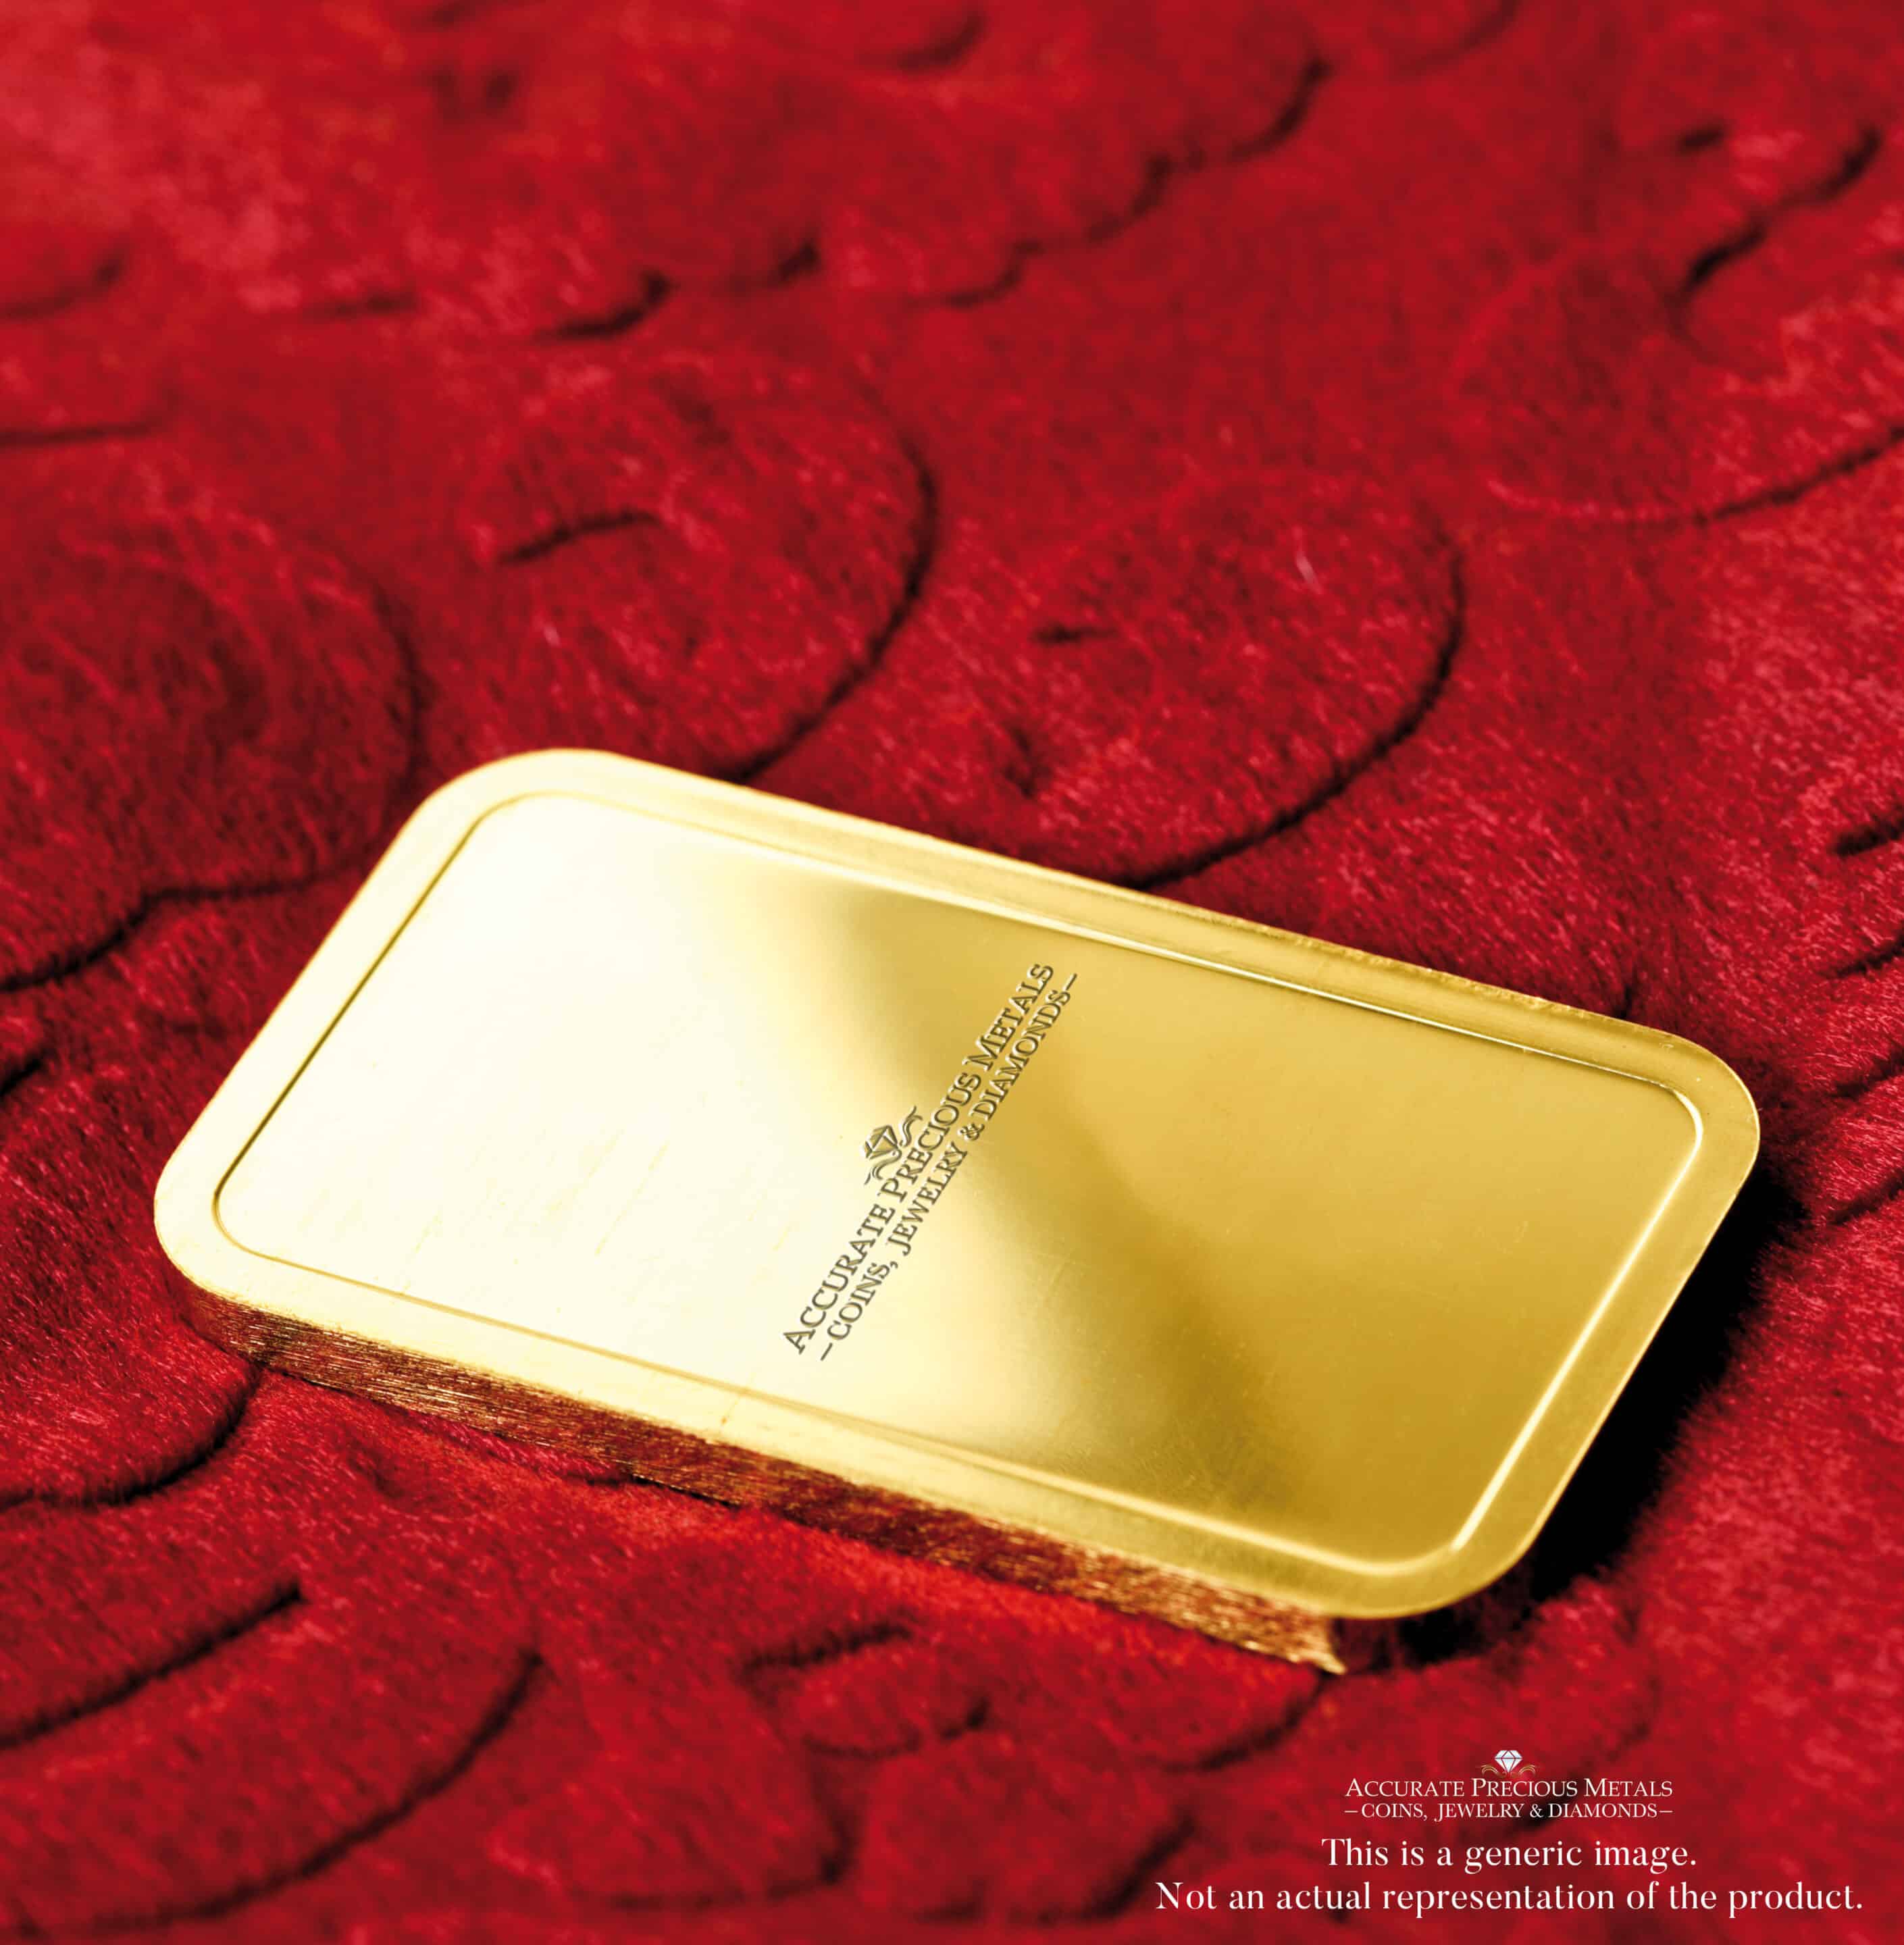 A solid gold bar with a polished surface and a rectangular shape. The bar radiates wealth and value, symbolizing the enduring appeal of gold as a precious metal investment.